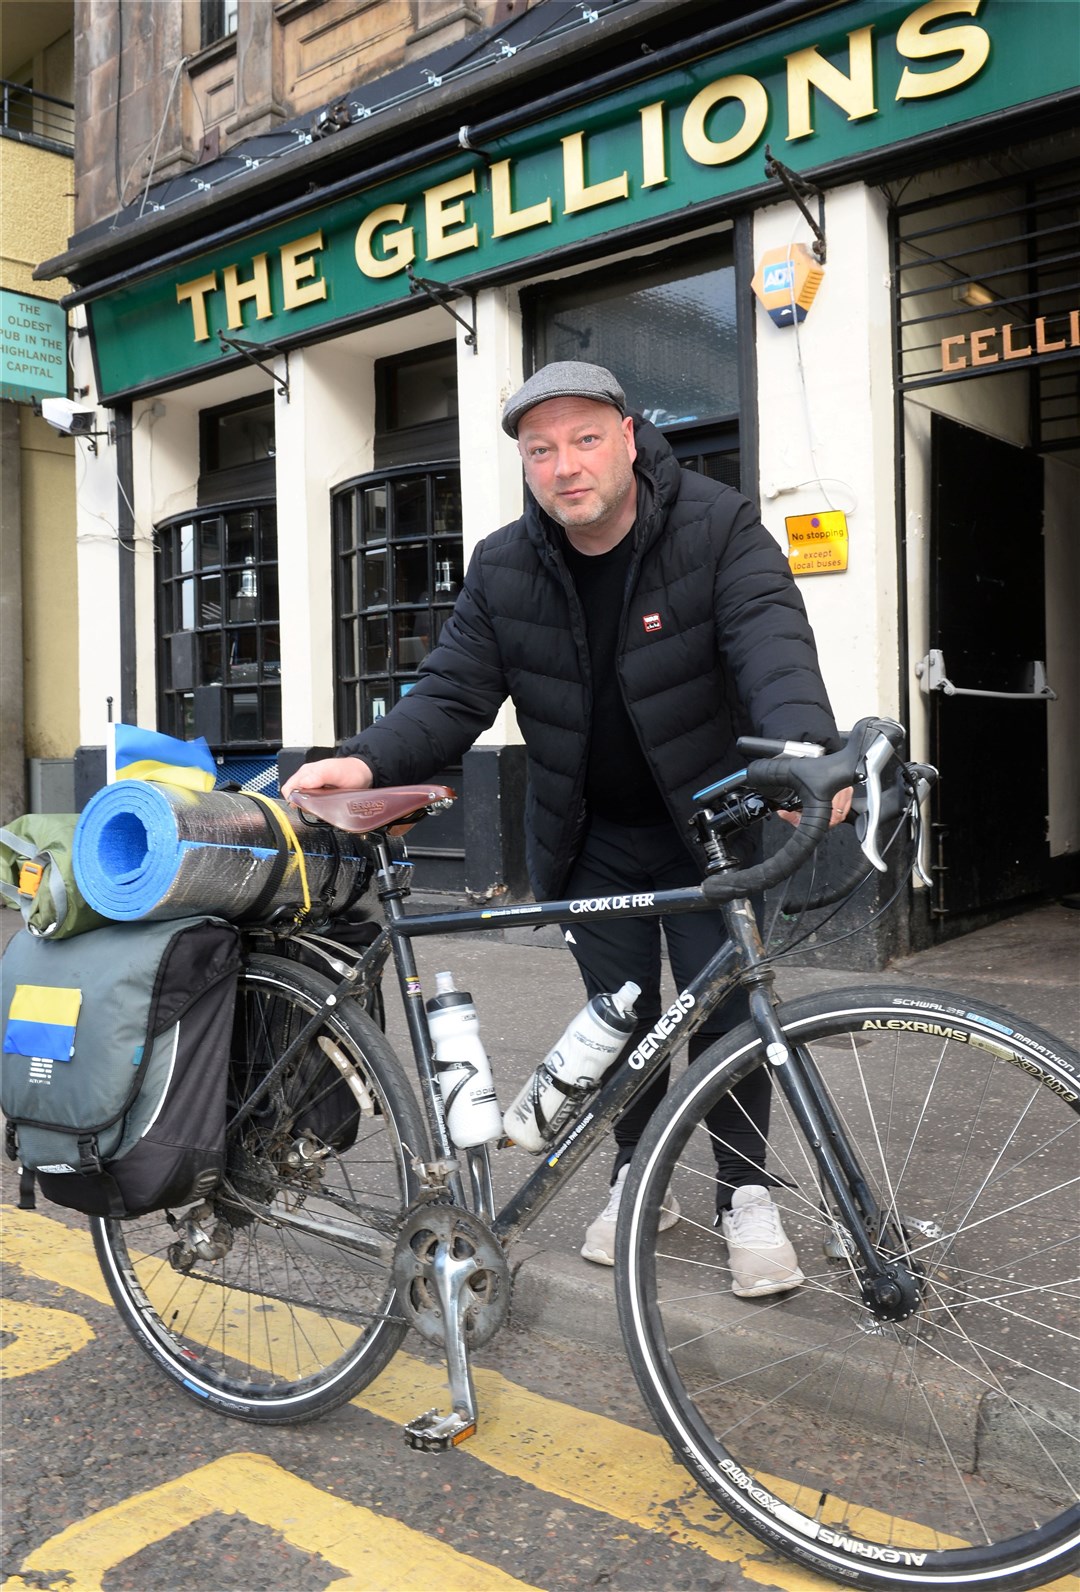 Alasdair Fraser before setting off for his Gdansk to The Gellions fundraising cycle ride for Urkraine. Picture: Gary Anthony